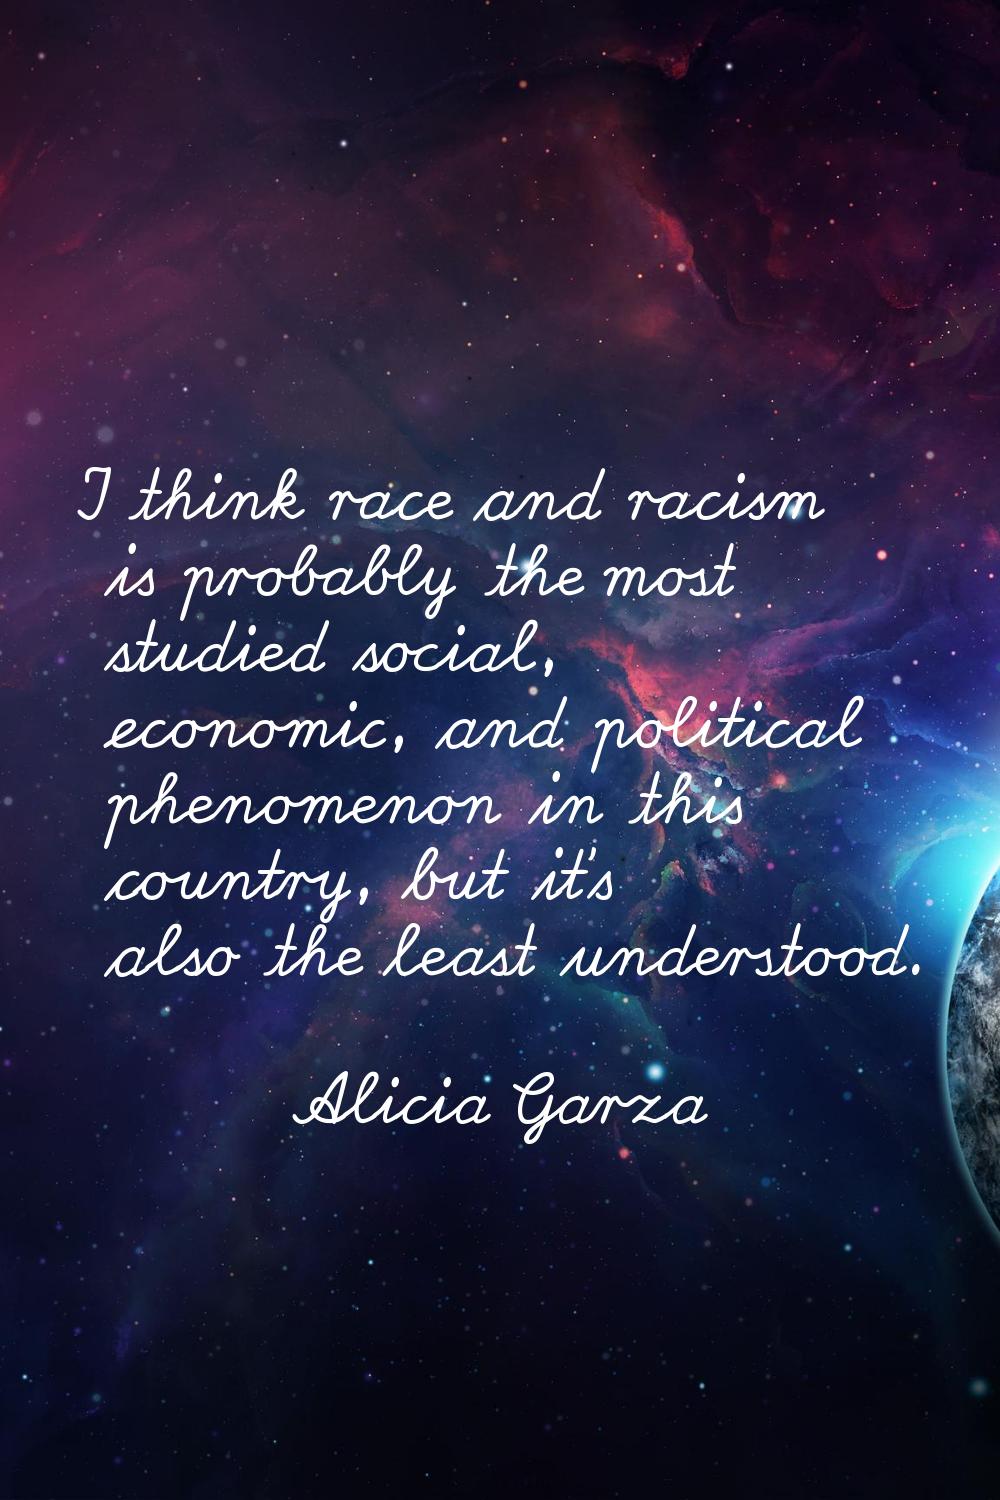 I think race and racism is probably the most studied social, economic, and political phenomenon in 